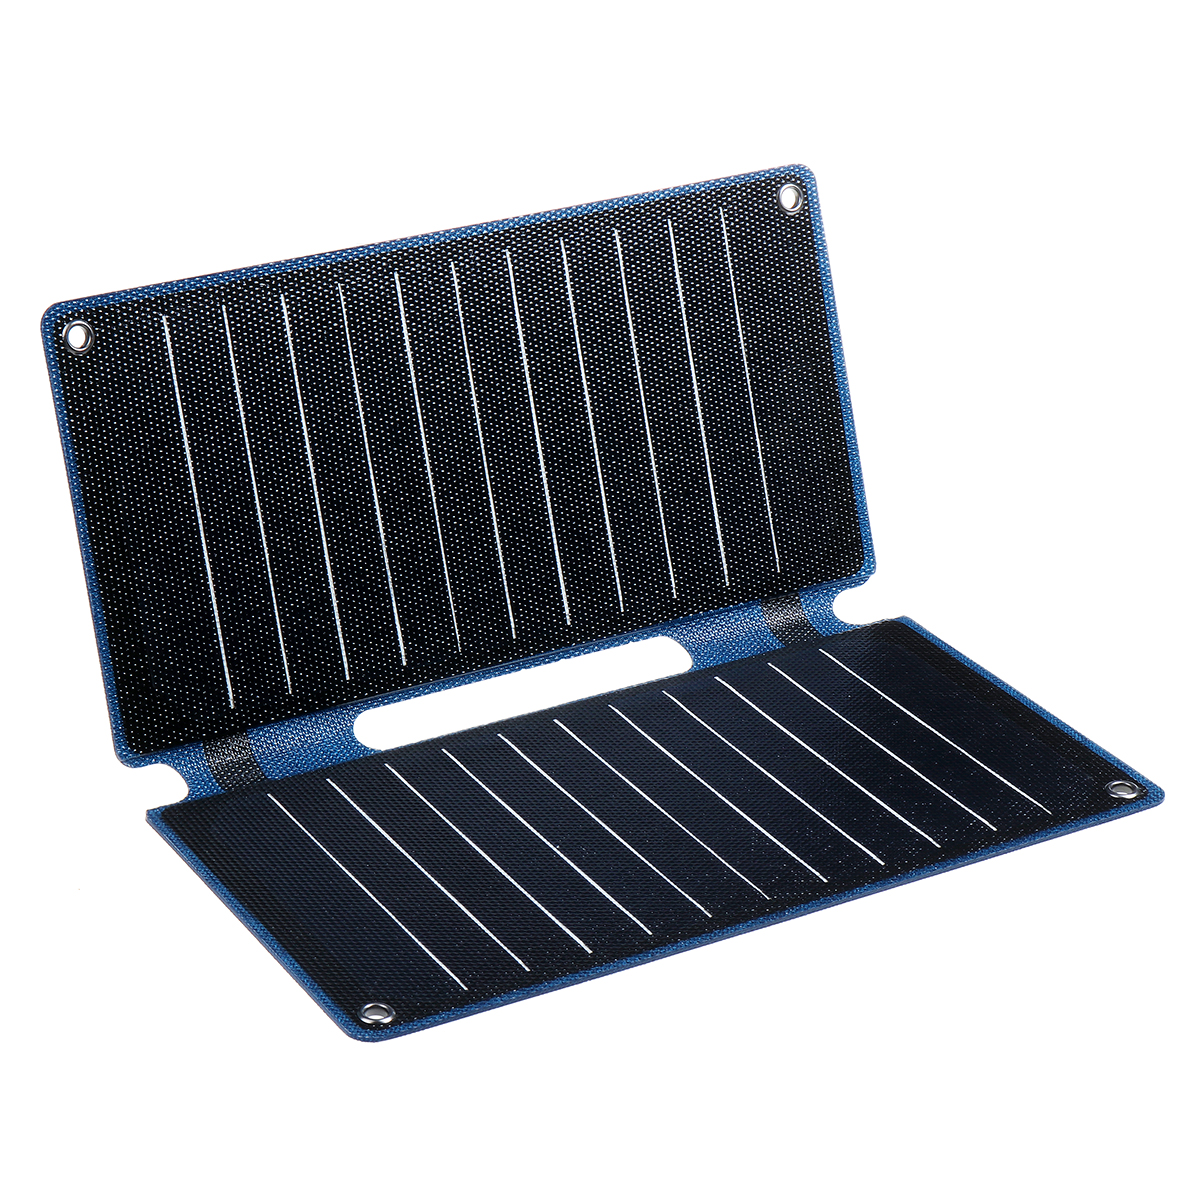 

25W USB ETFE Sunpower Foldable Solar Panel Outdoor Camping Power Bank Charger